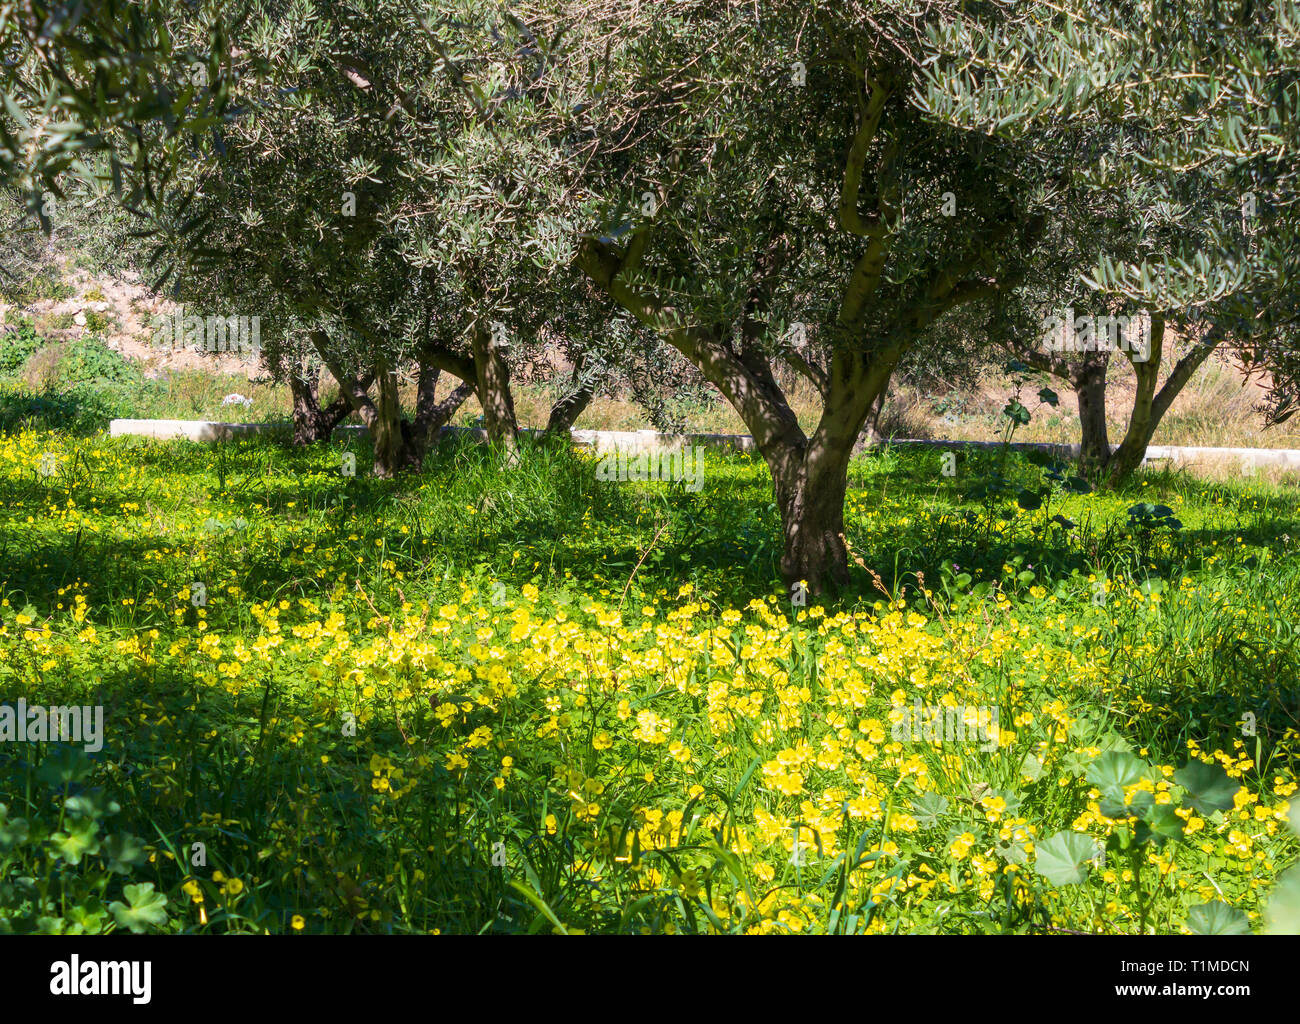 Oxalis pes-caprae, Wild Bermuda buttercup Flowers in an Olive Grove, Olea europaea, bathed in Sunlight Stock Photo